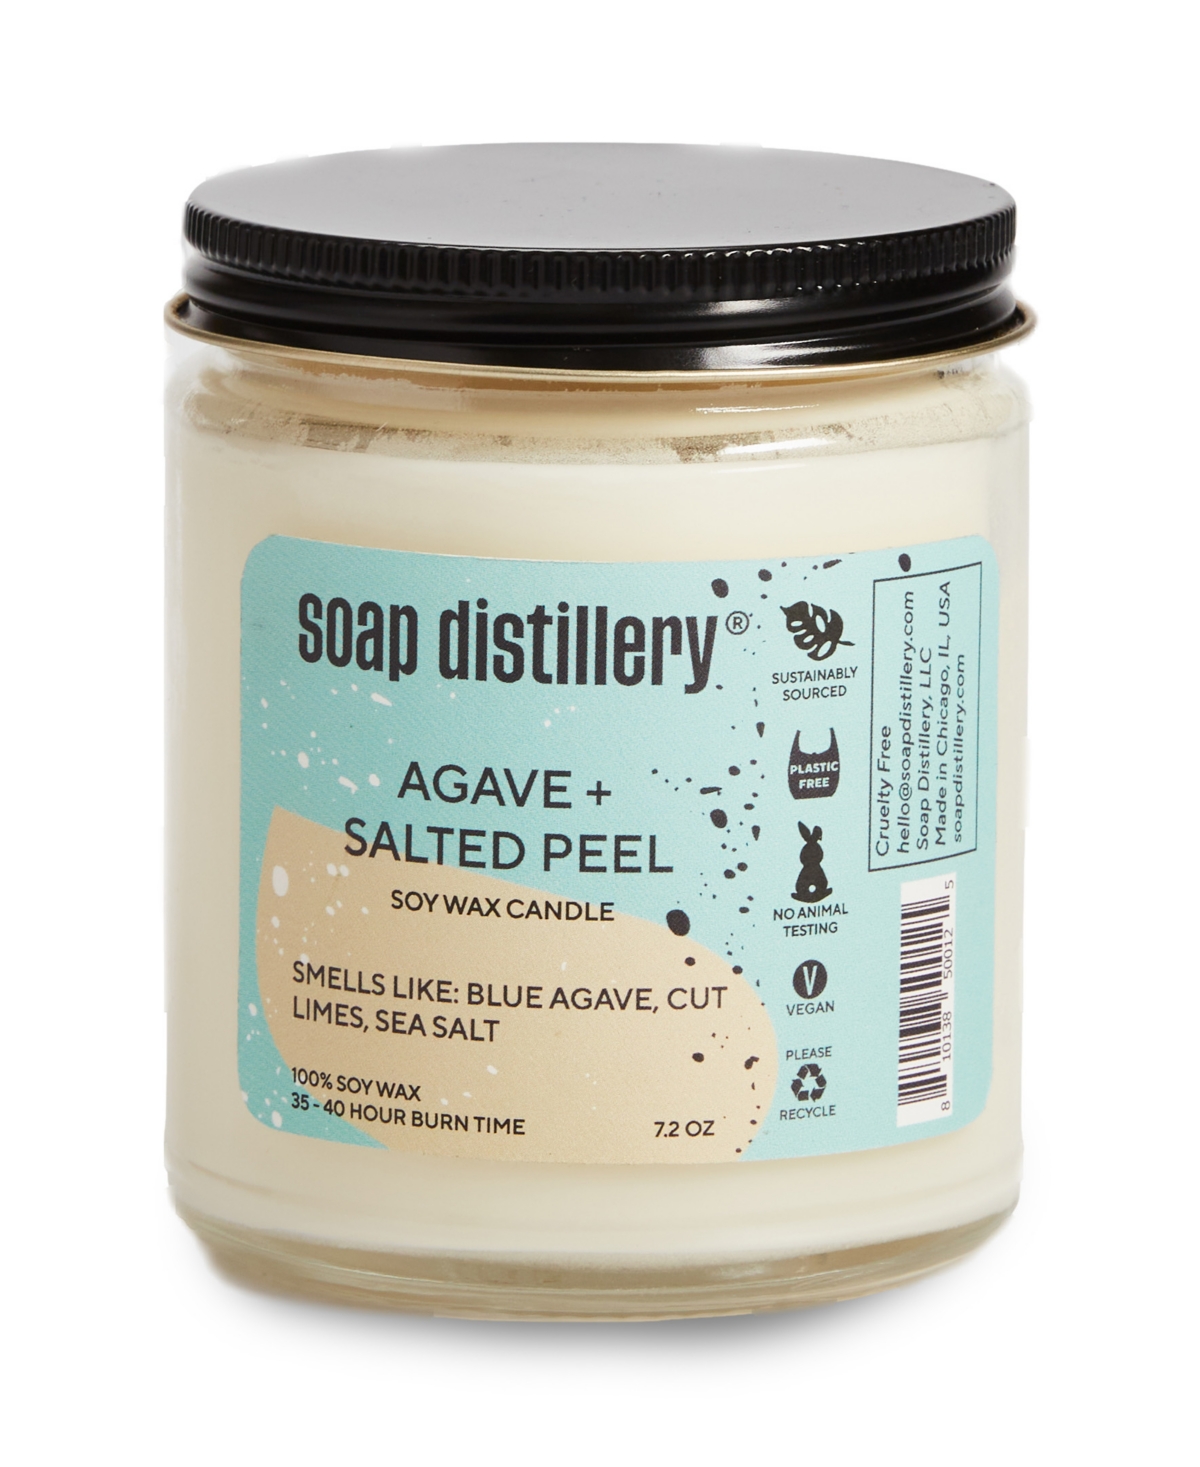 Agave Plus Salted Peel Soy Wax Candle - Green